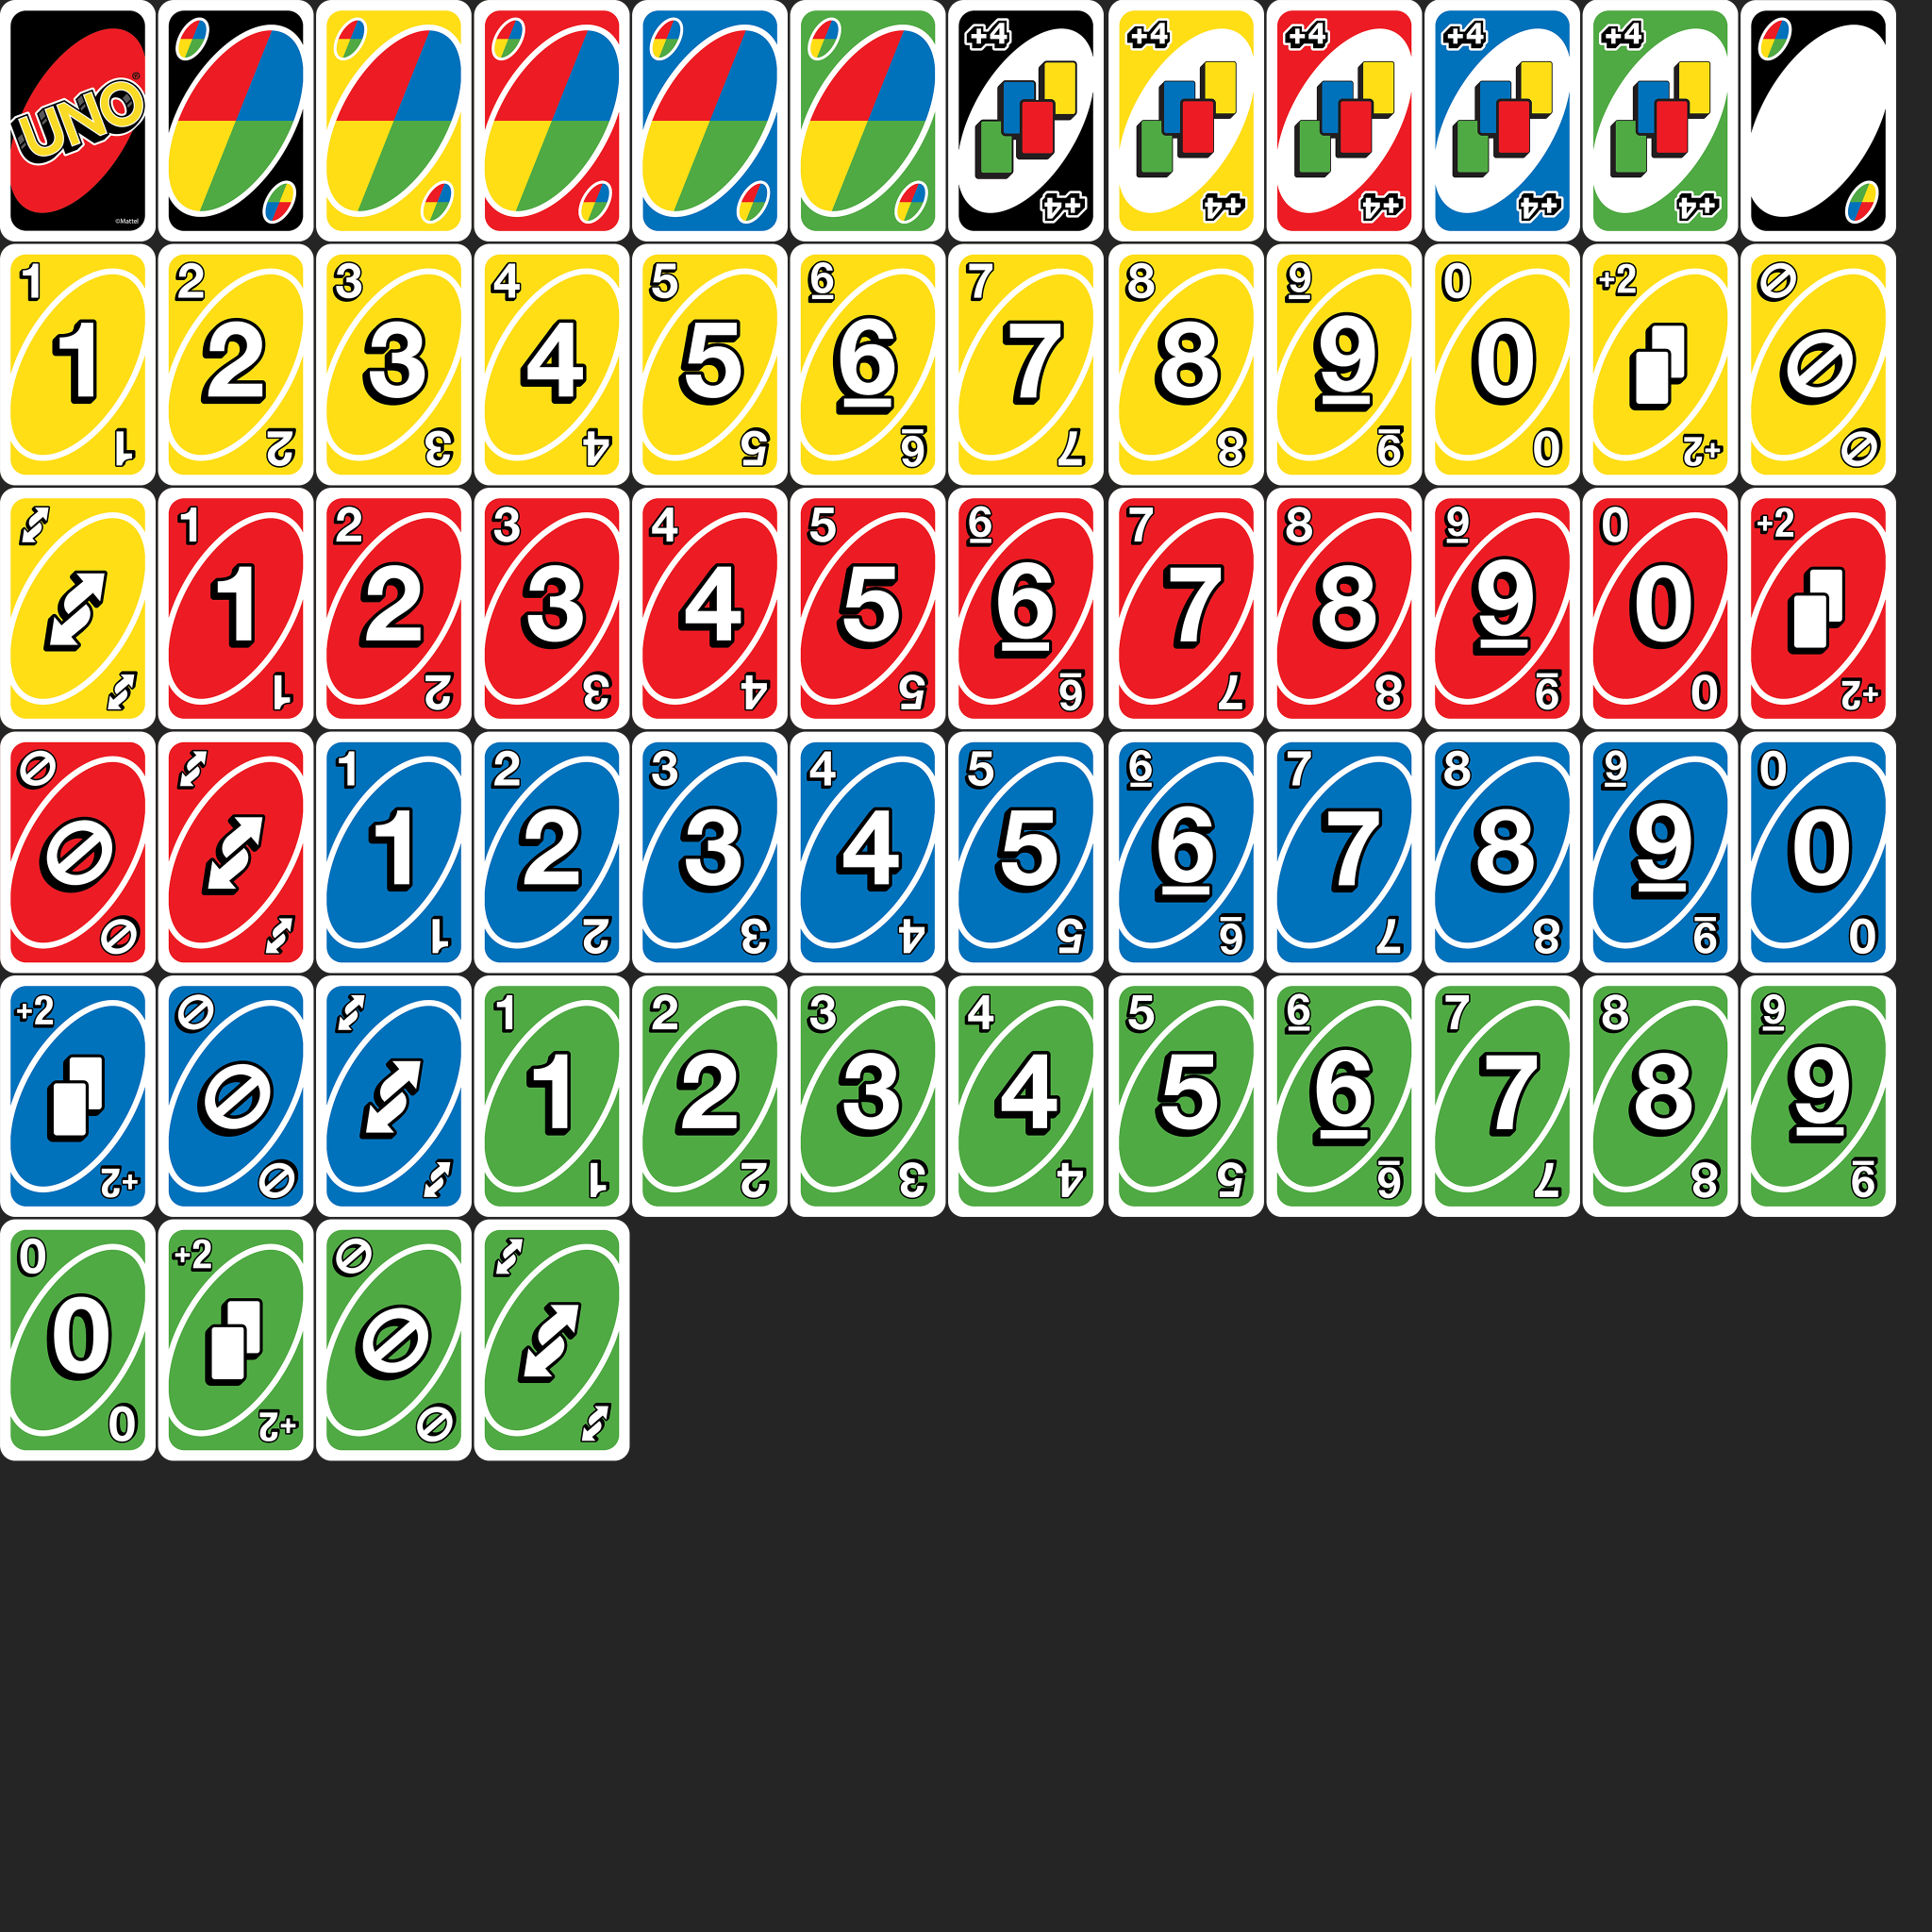 What Do All The Uno Cards Mean